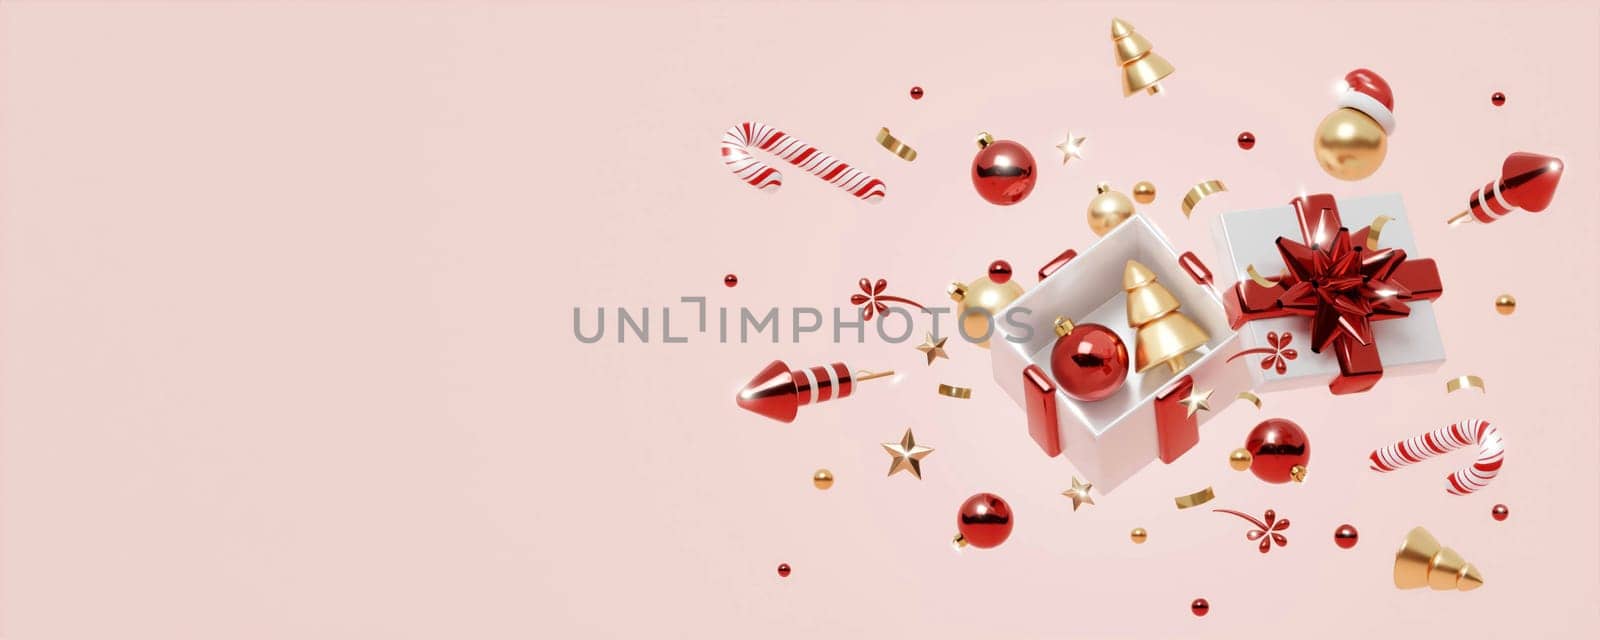 Christmas banner. Background Xmas design of sparkling lights garland, with realistic glitter gold confetti. square New Year poster, greeting card, header, website. 3d render by meepiangraphic